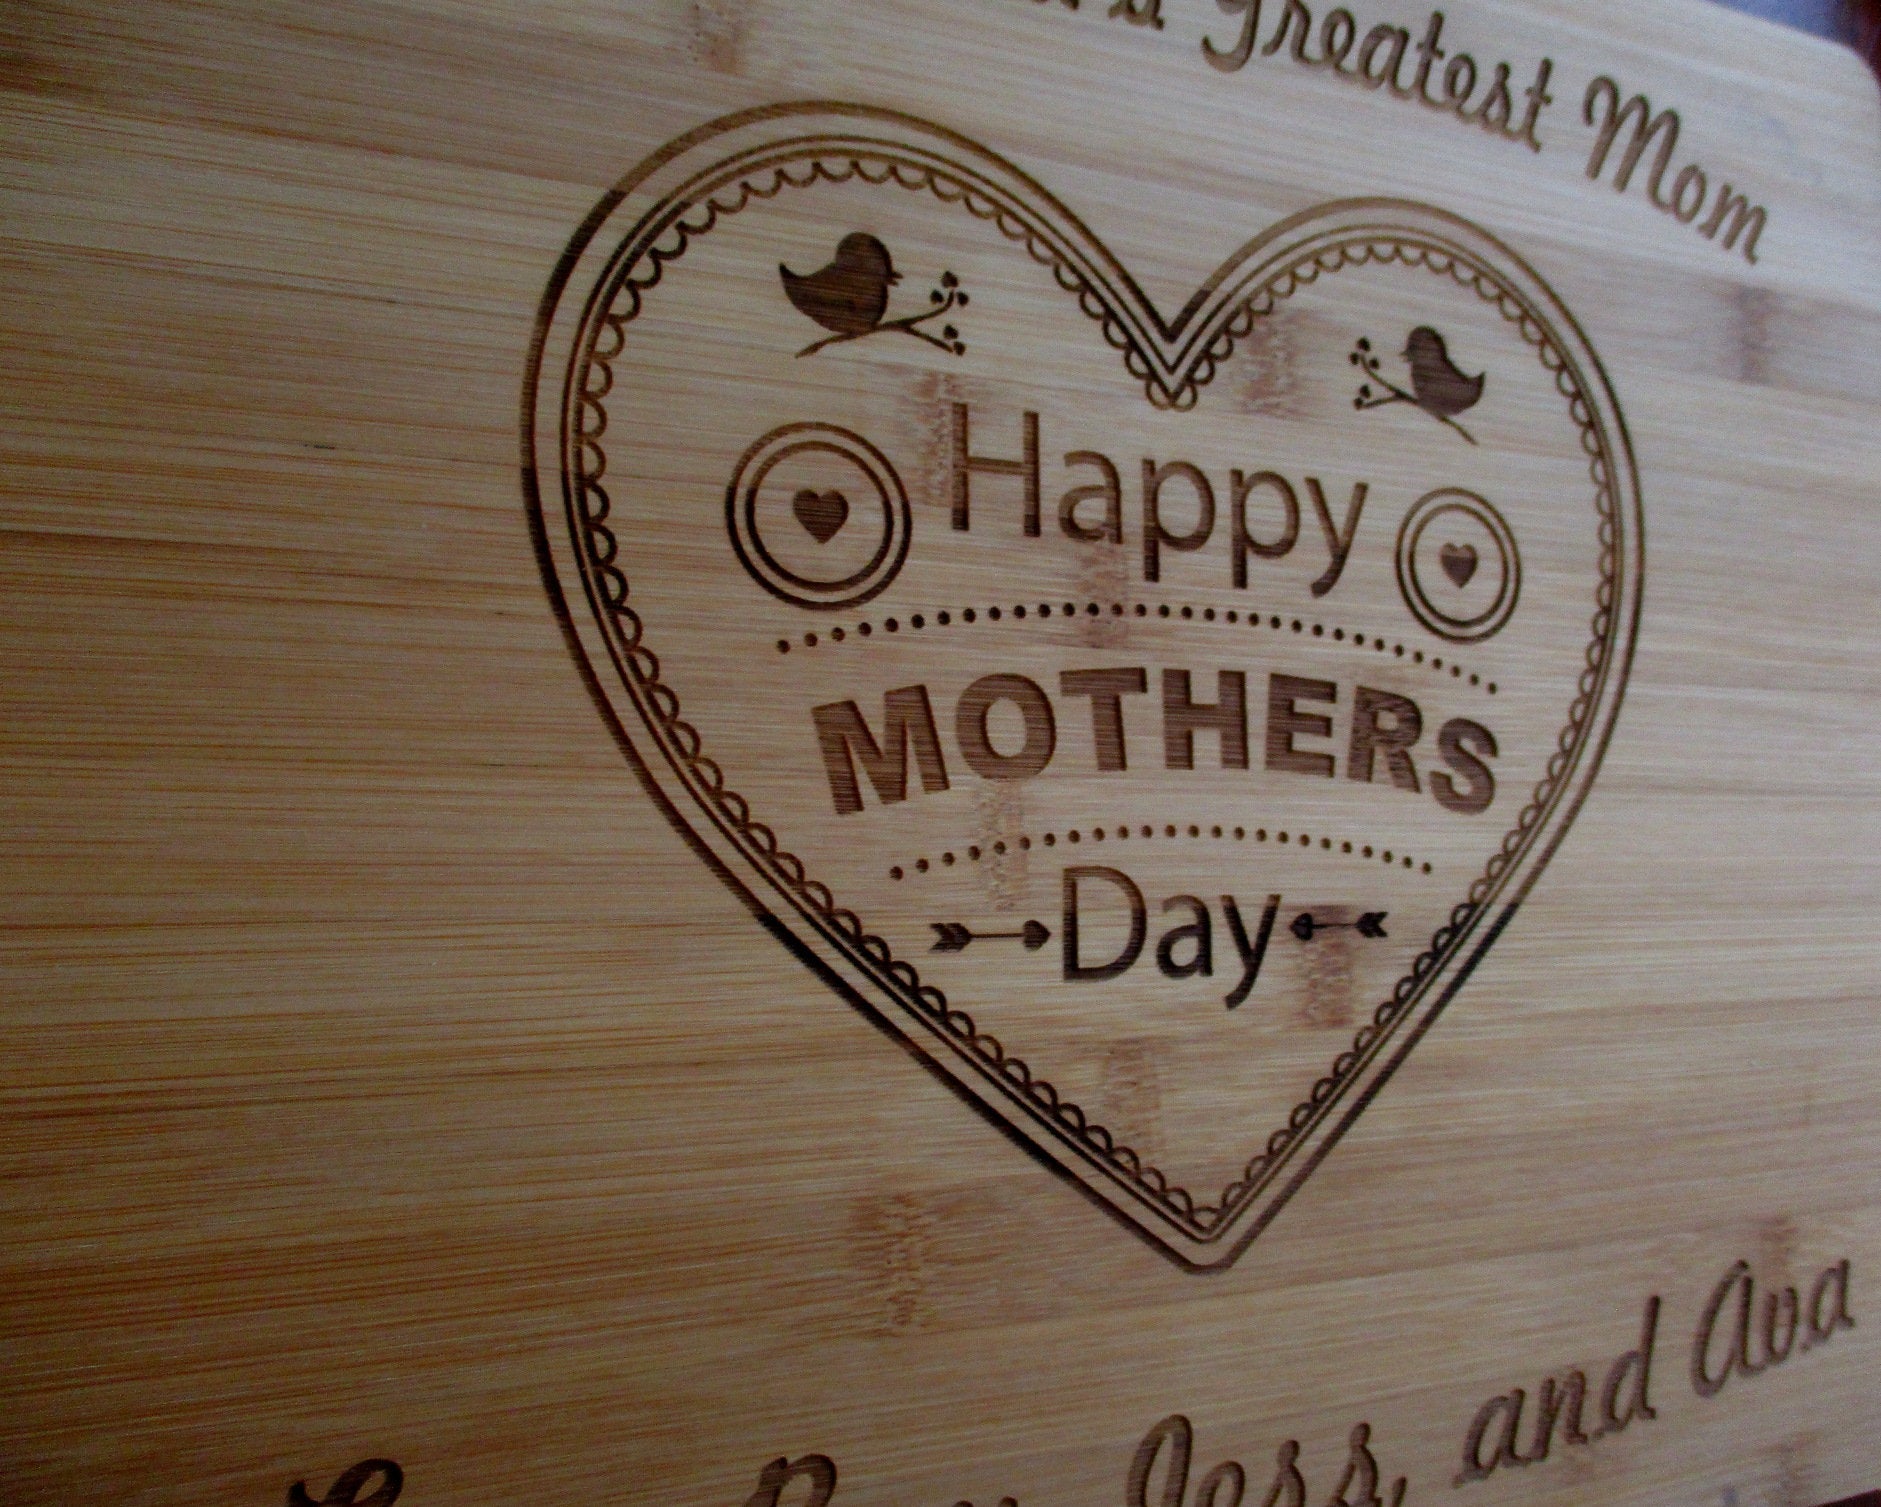 Custom Cutting Board With TREE and HEART. Laser Engraved Handmade